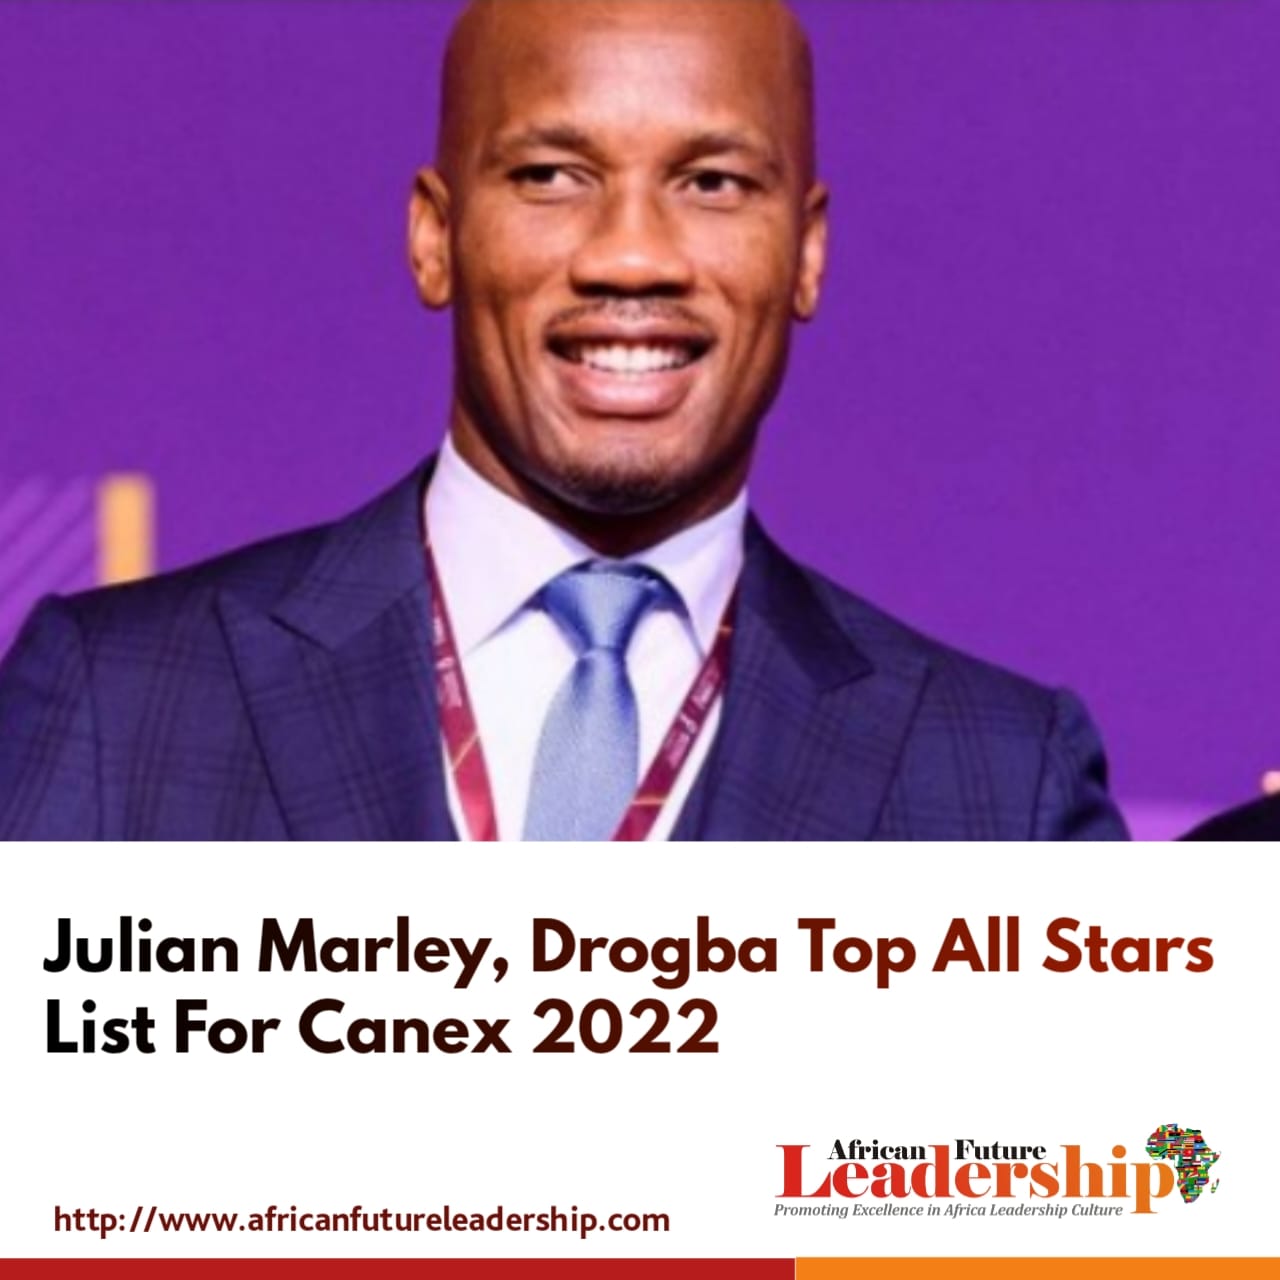 Julian Marley, Drogba Top All Stars List For Canex 2022